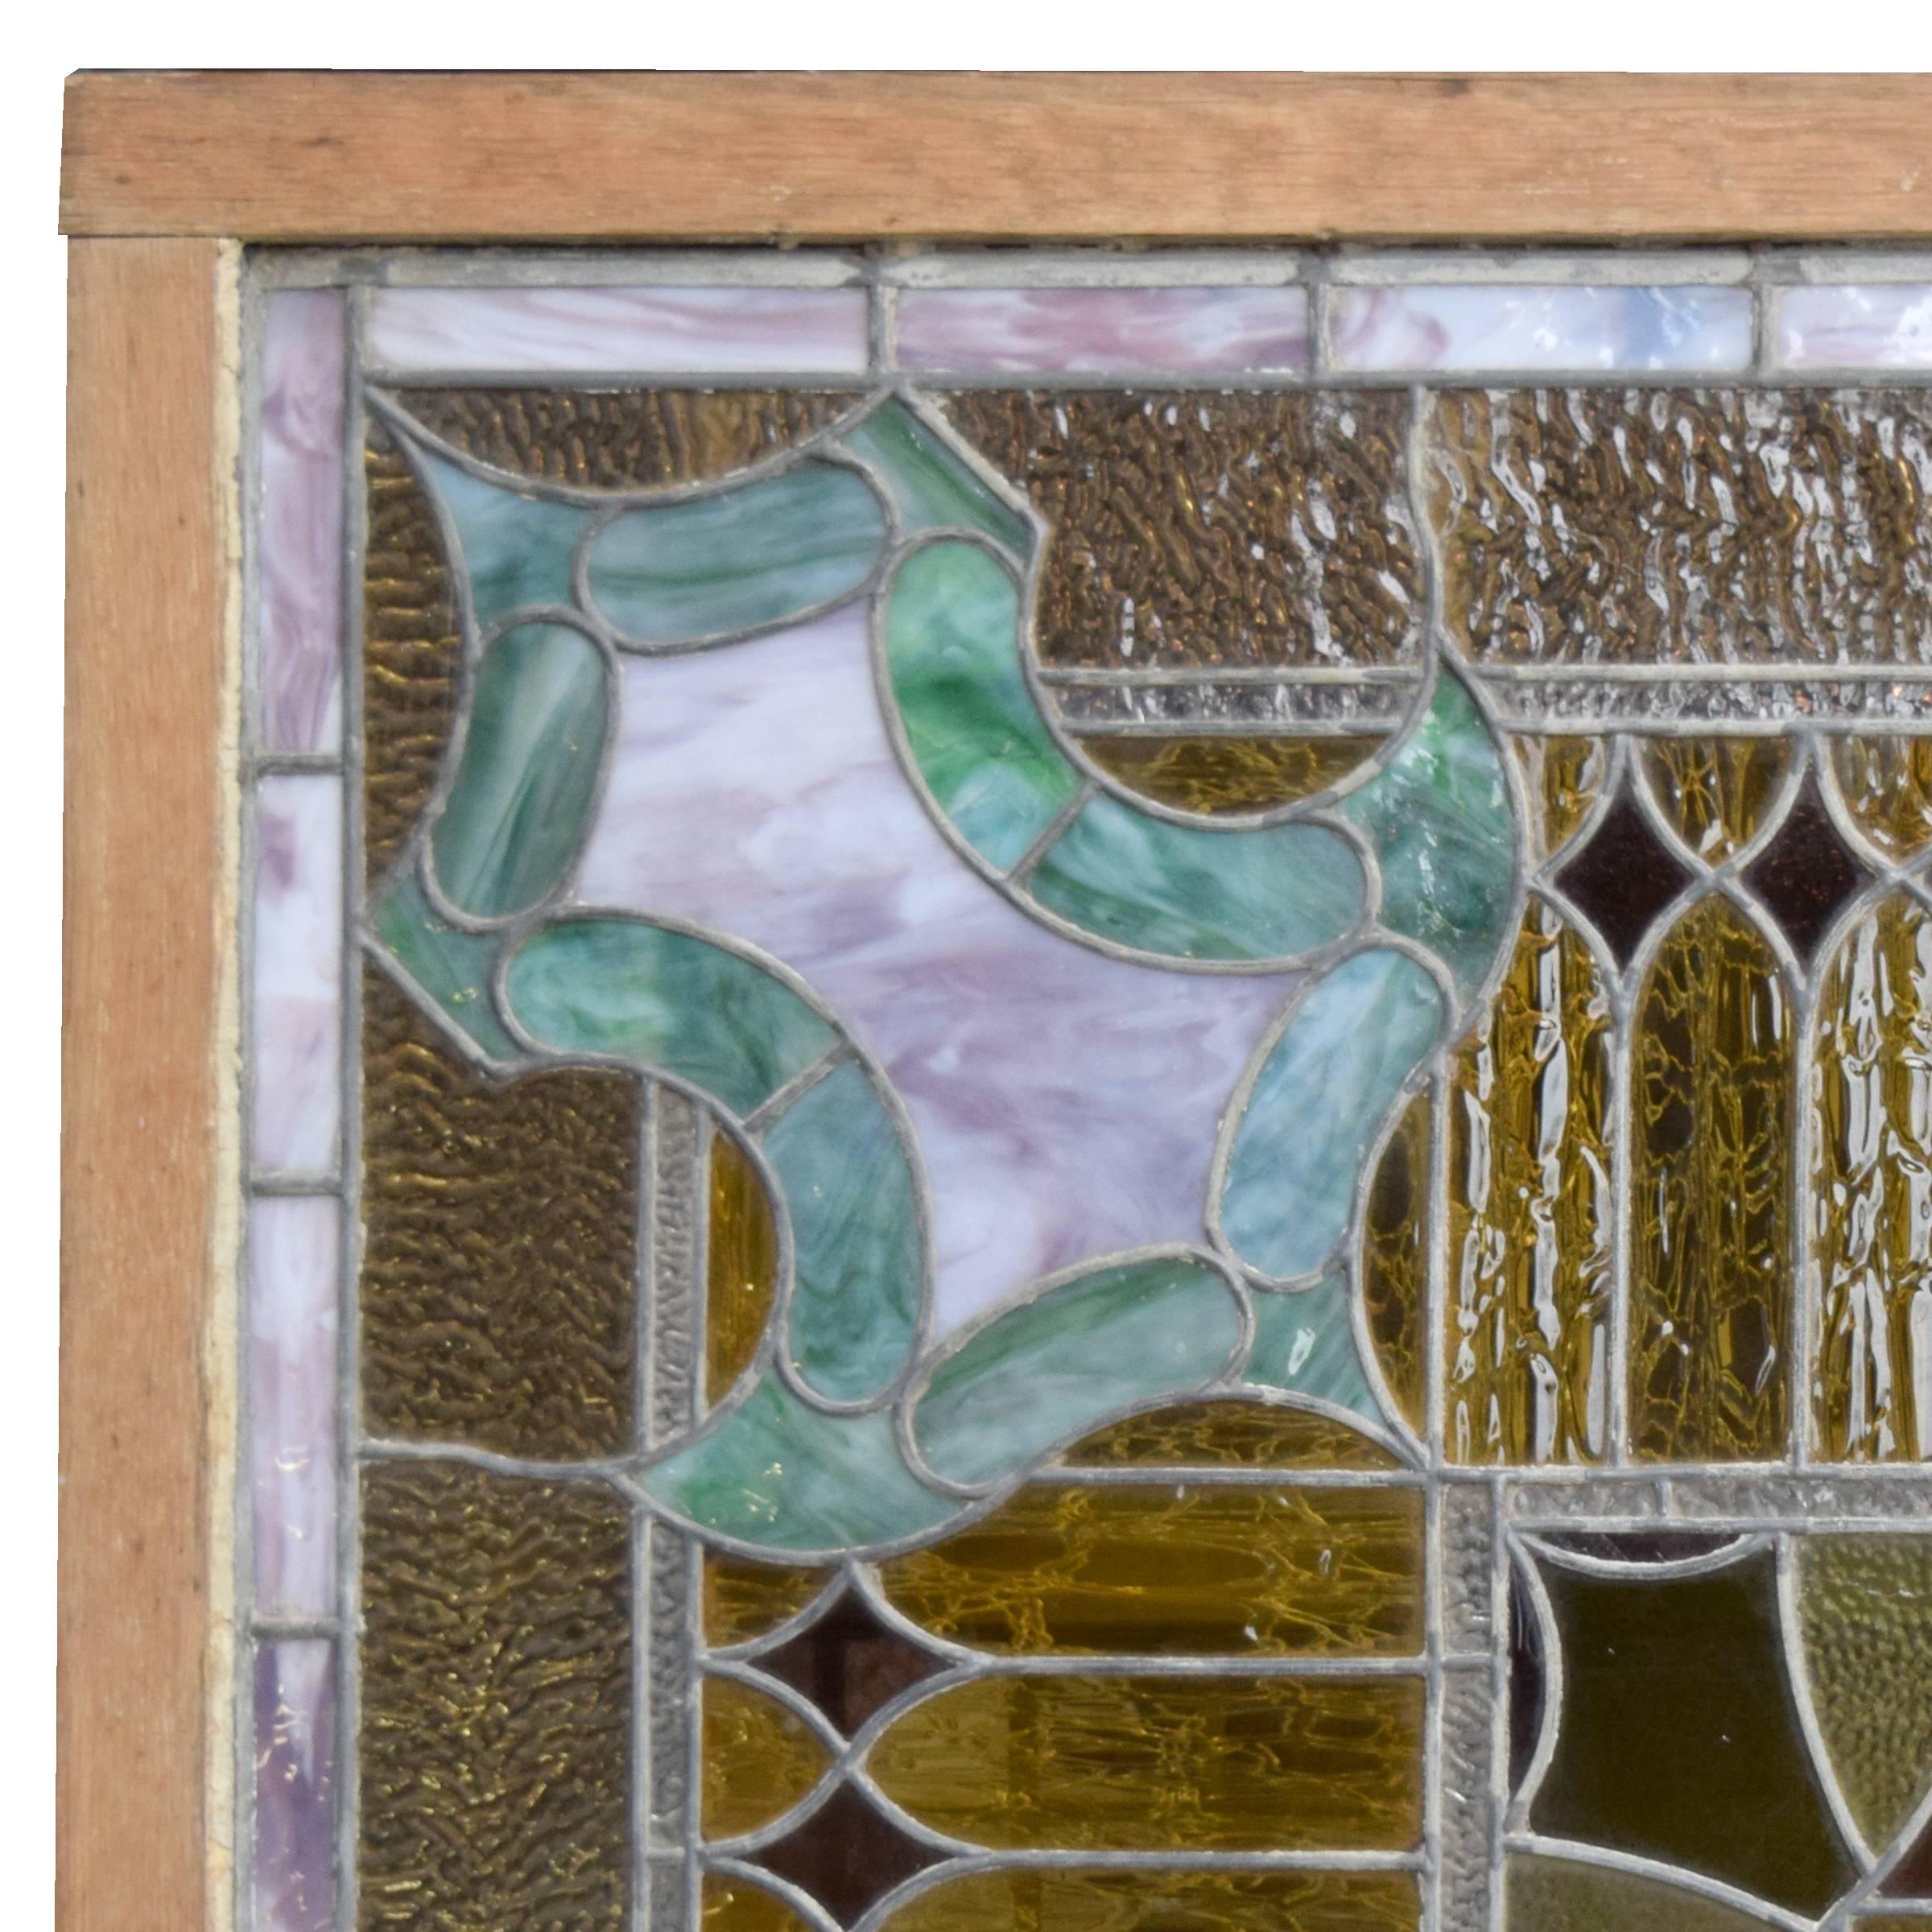 An impressive American square stained glass window in a wood frame.